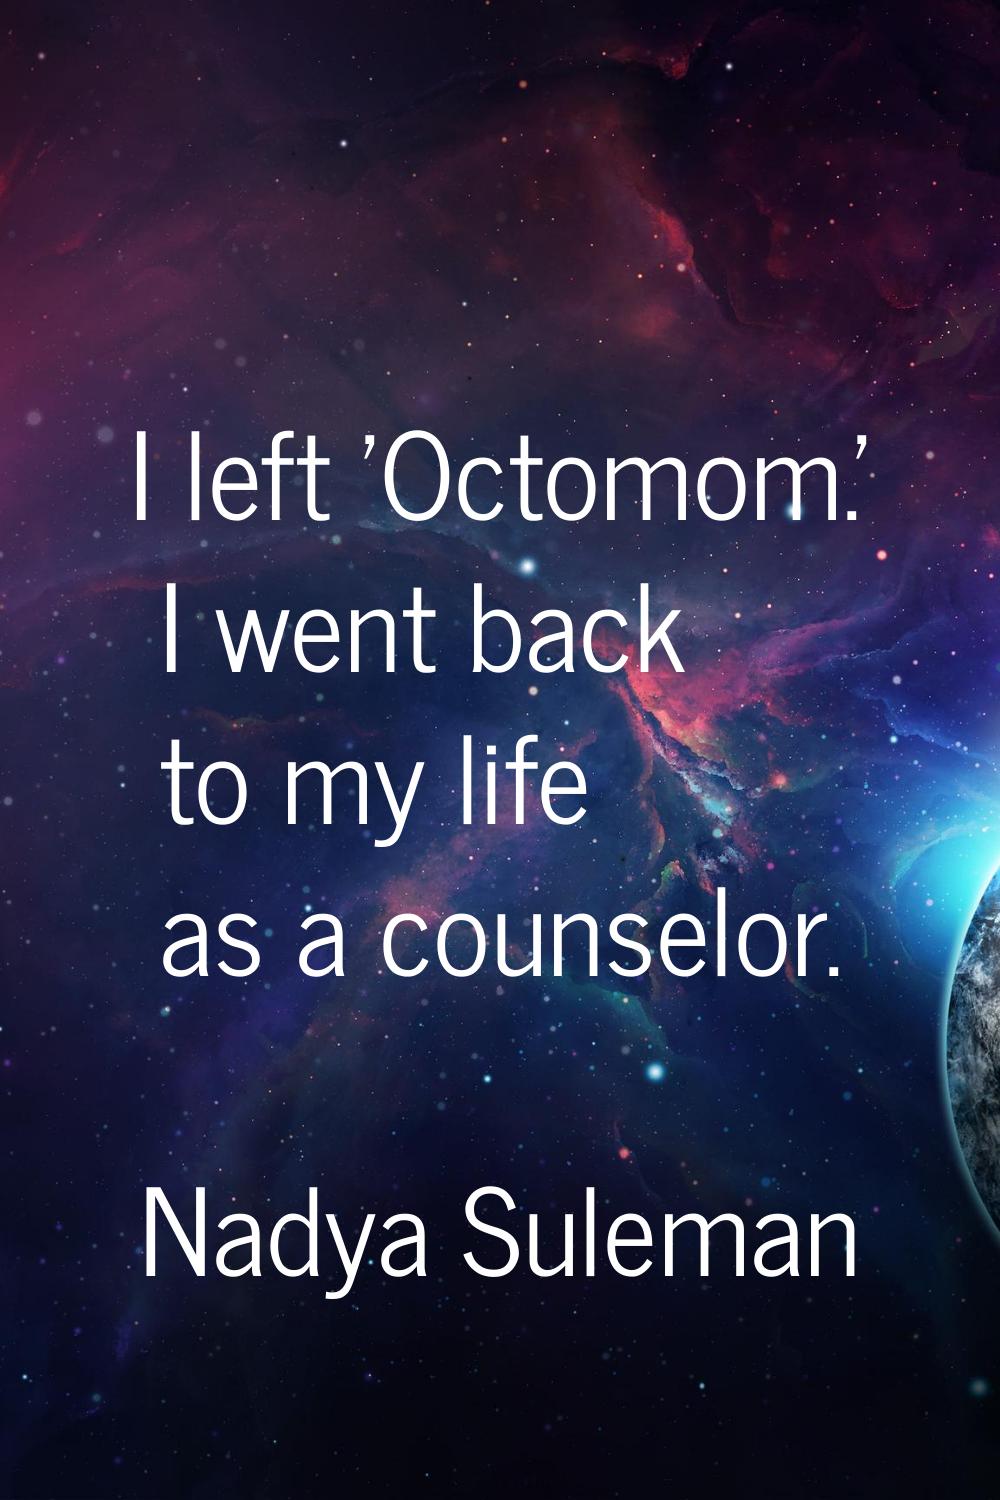 I left 'Octomom.' I went back to my life as a counselor.